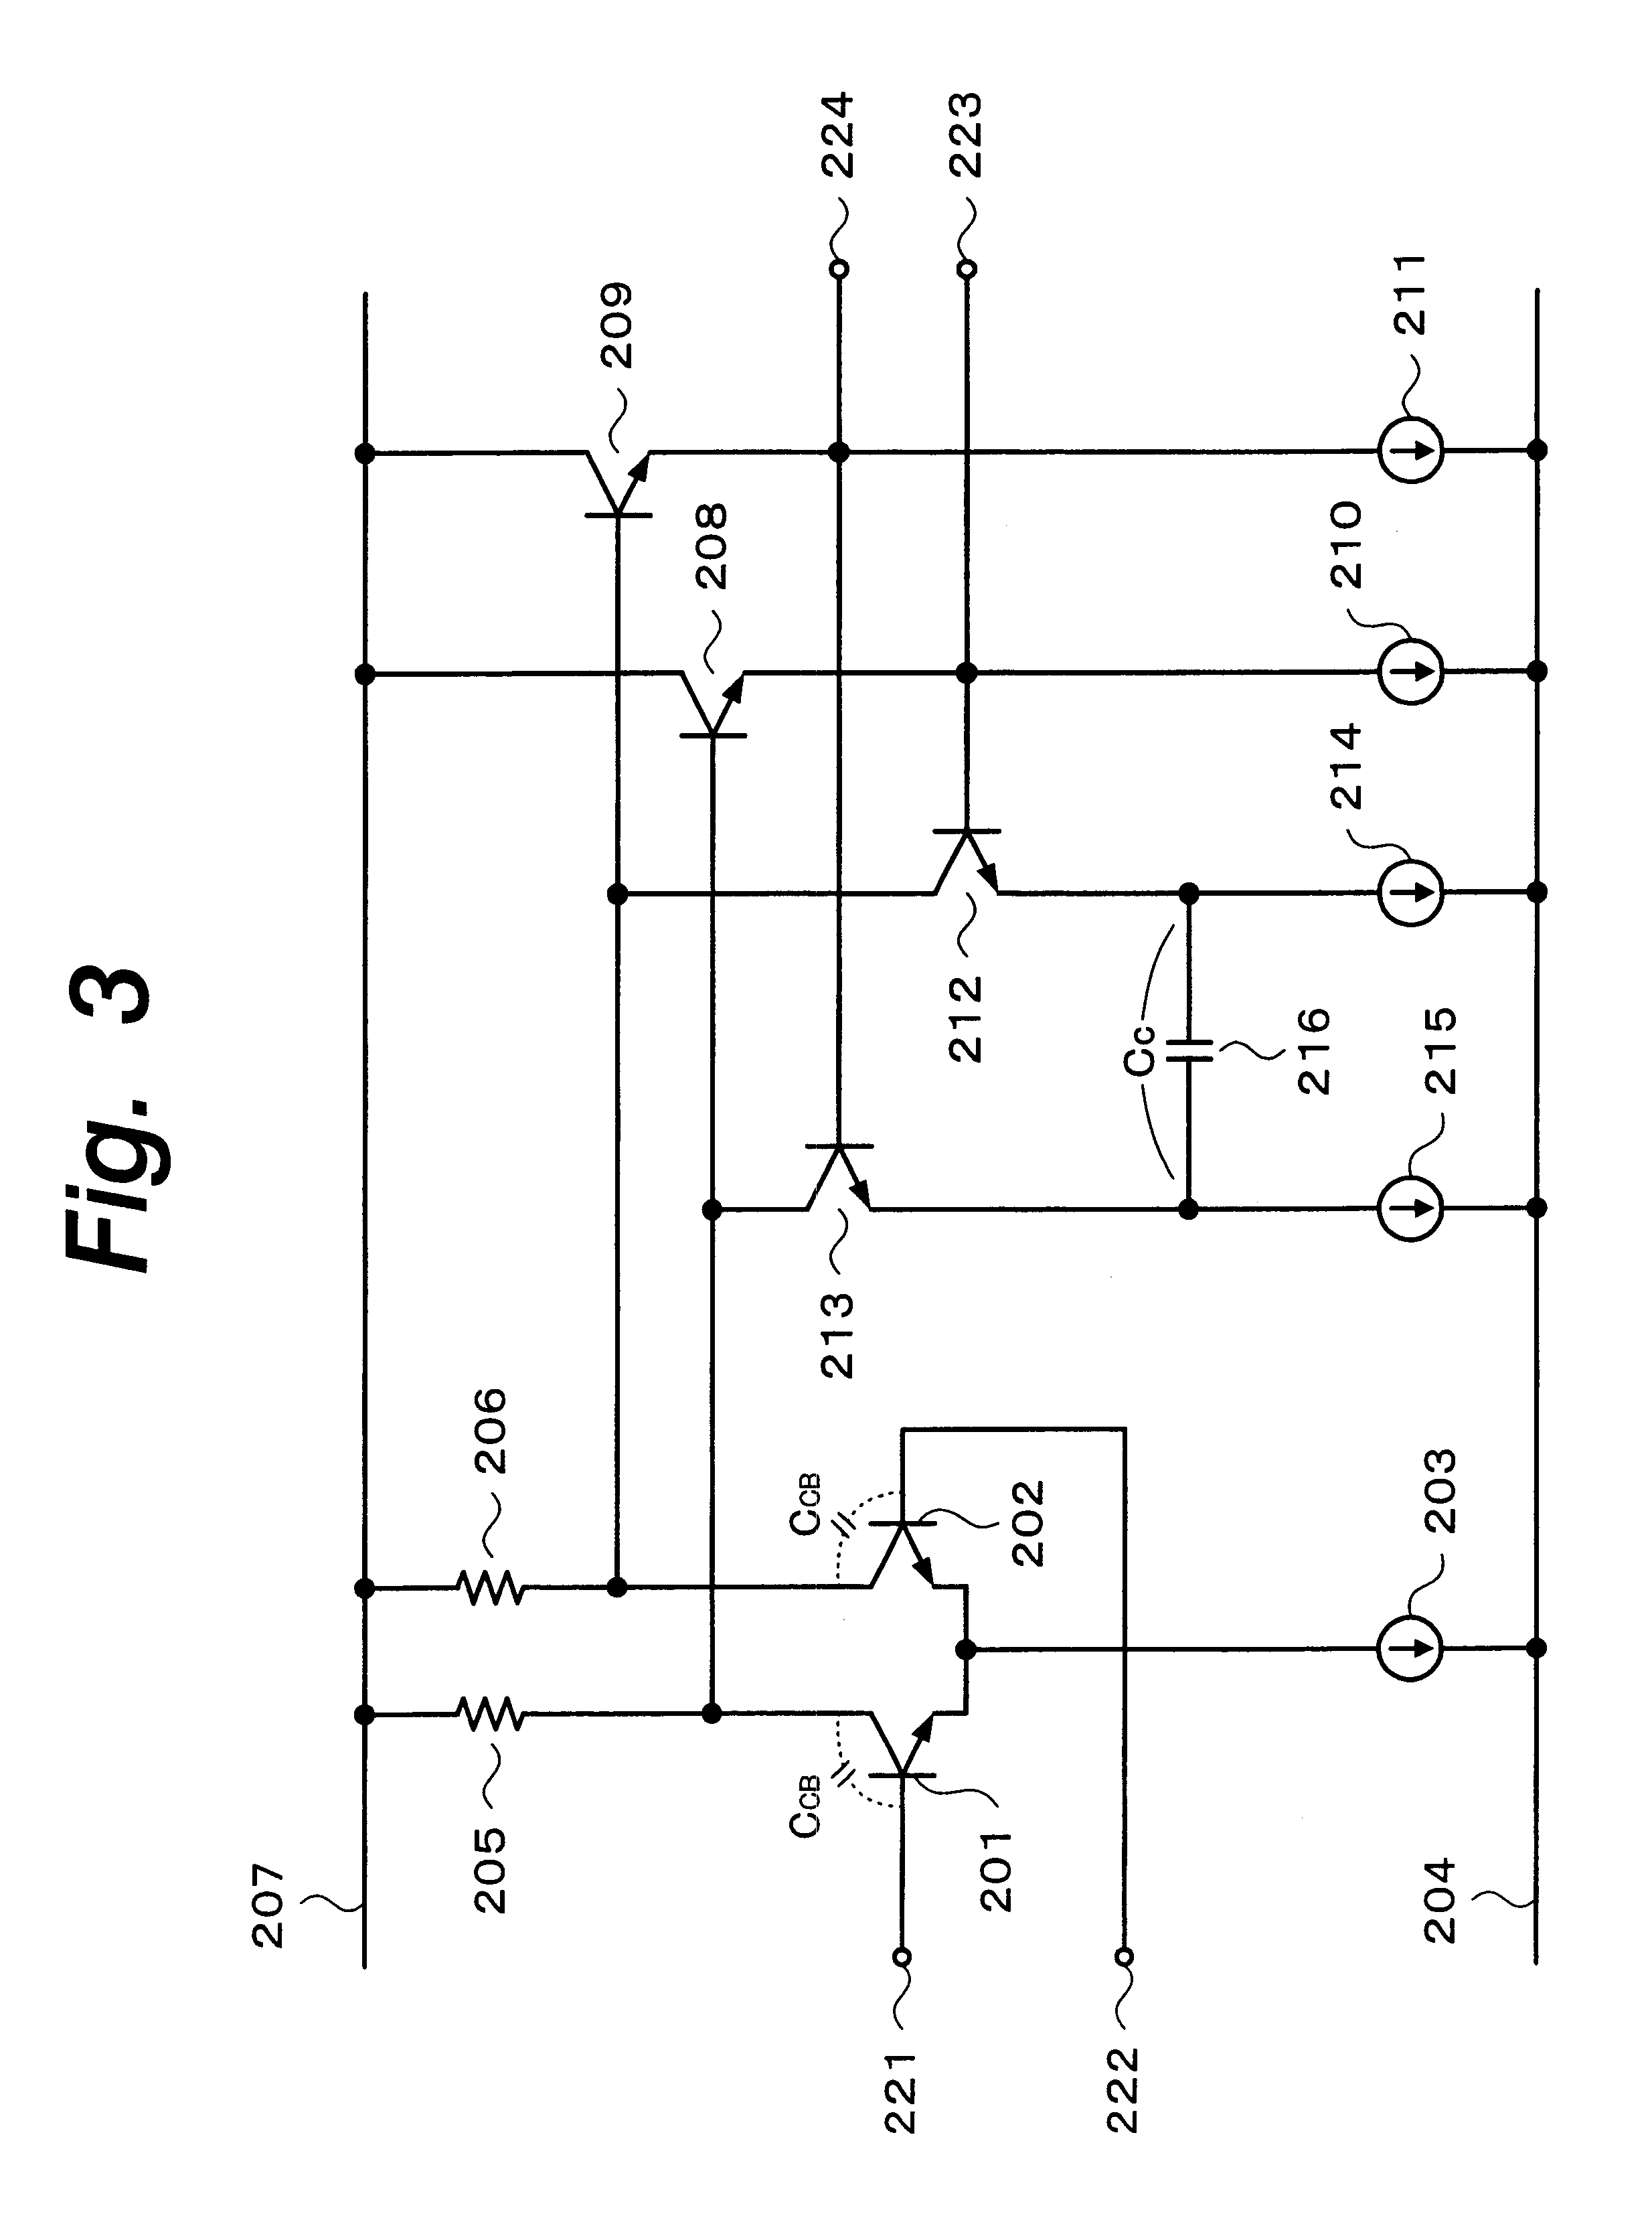 Differential amplifier, comparator, and A/D converter